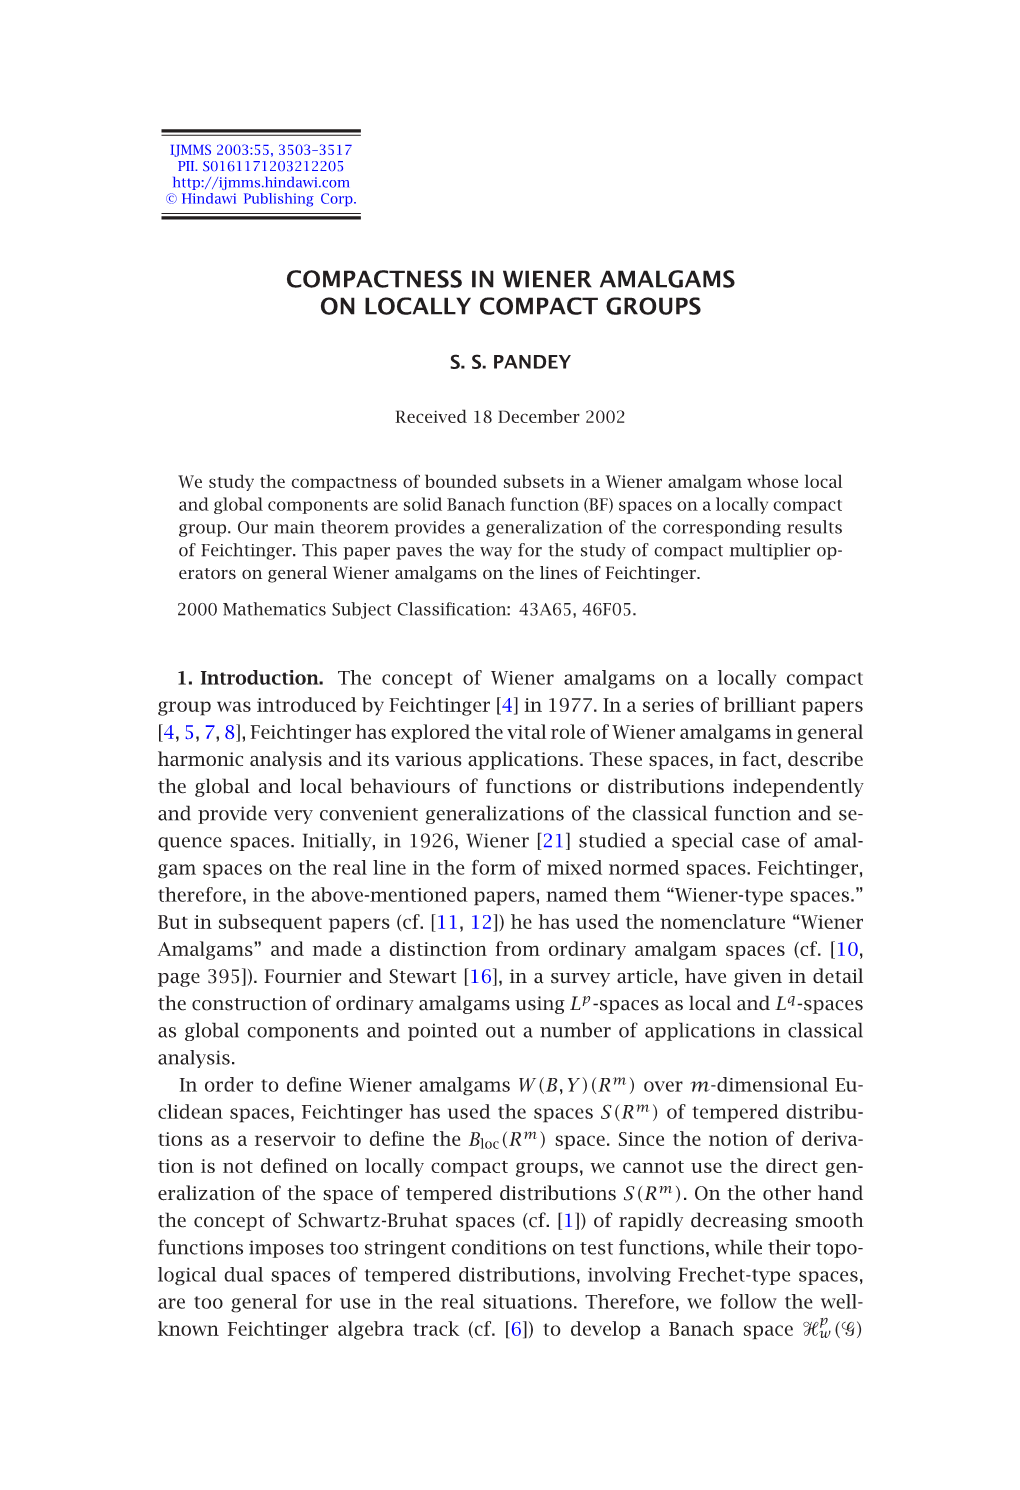 Compactness in Wiener Amalgams on Locally Compact Groups